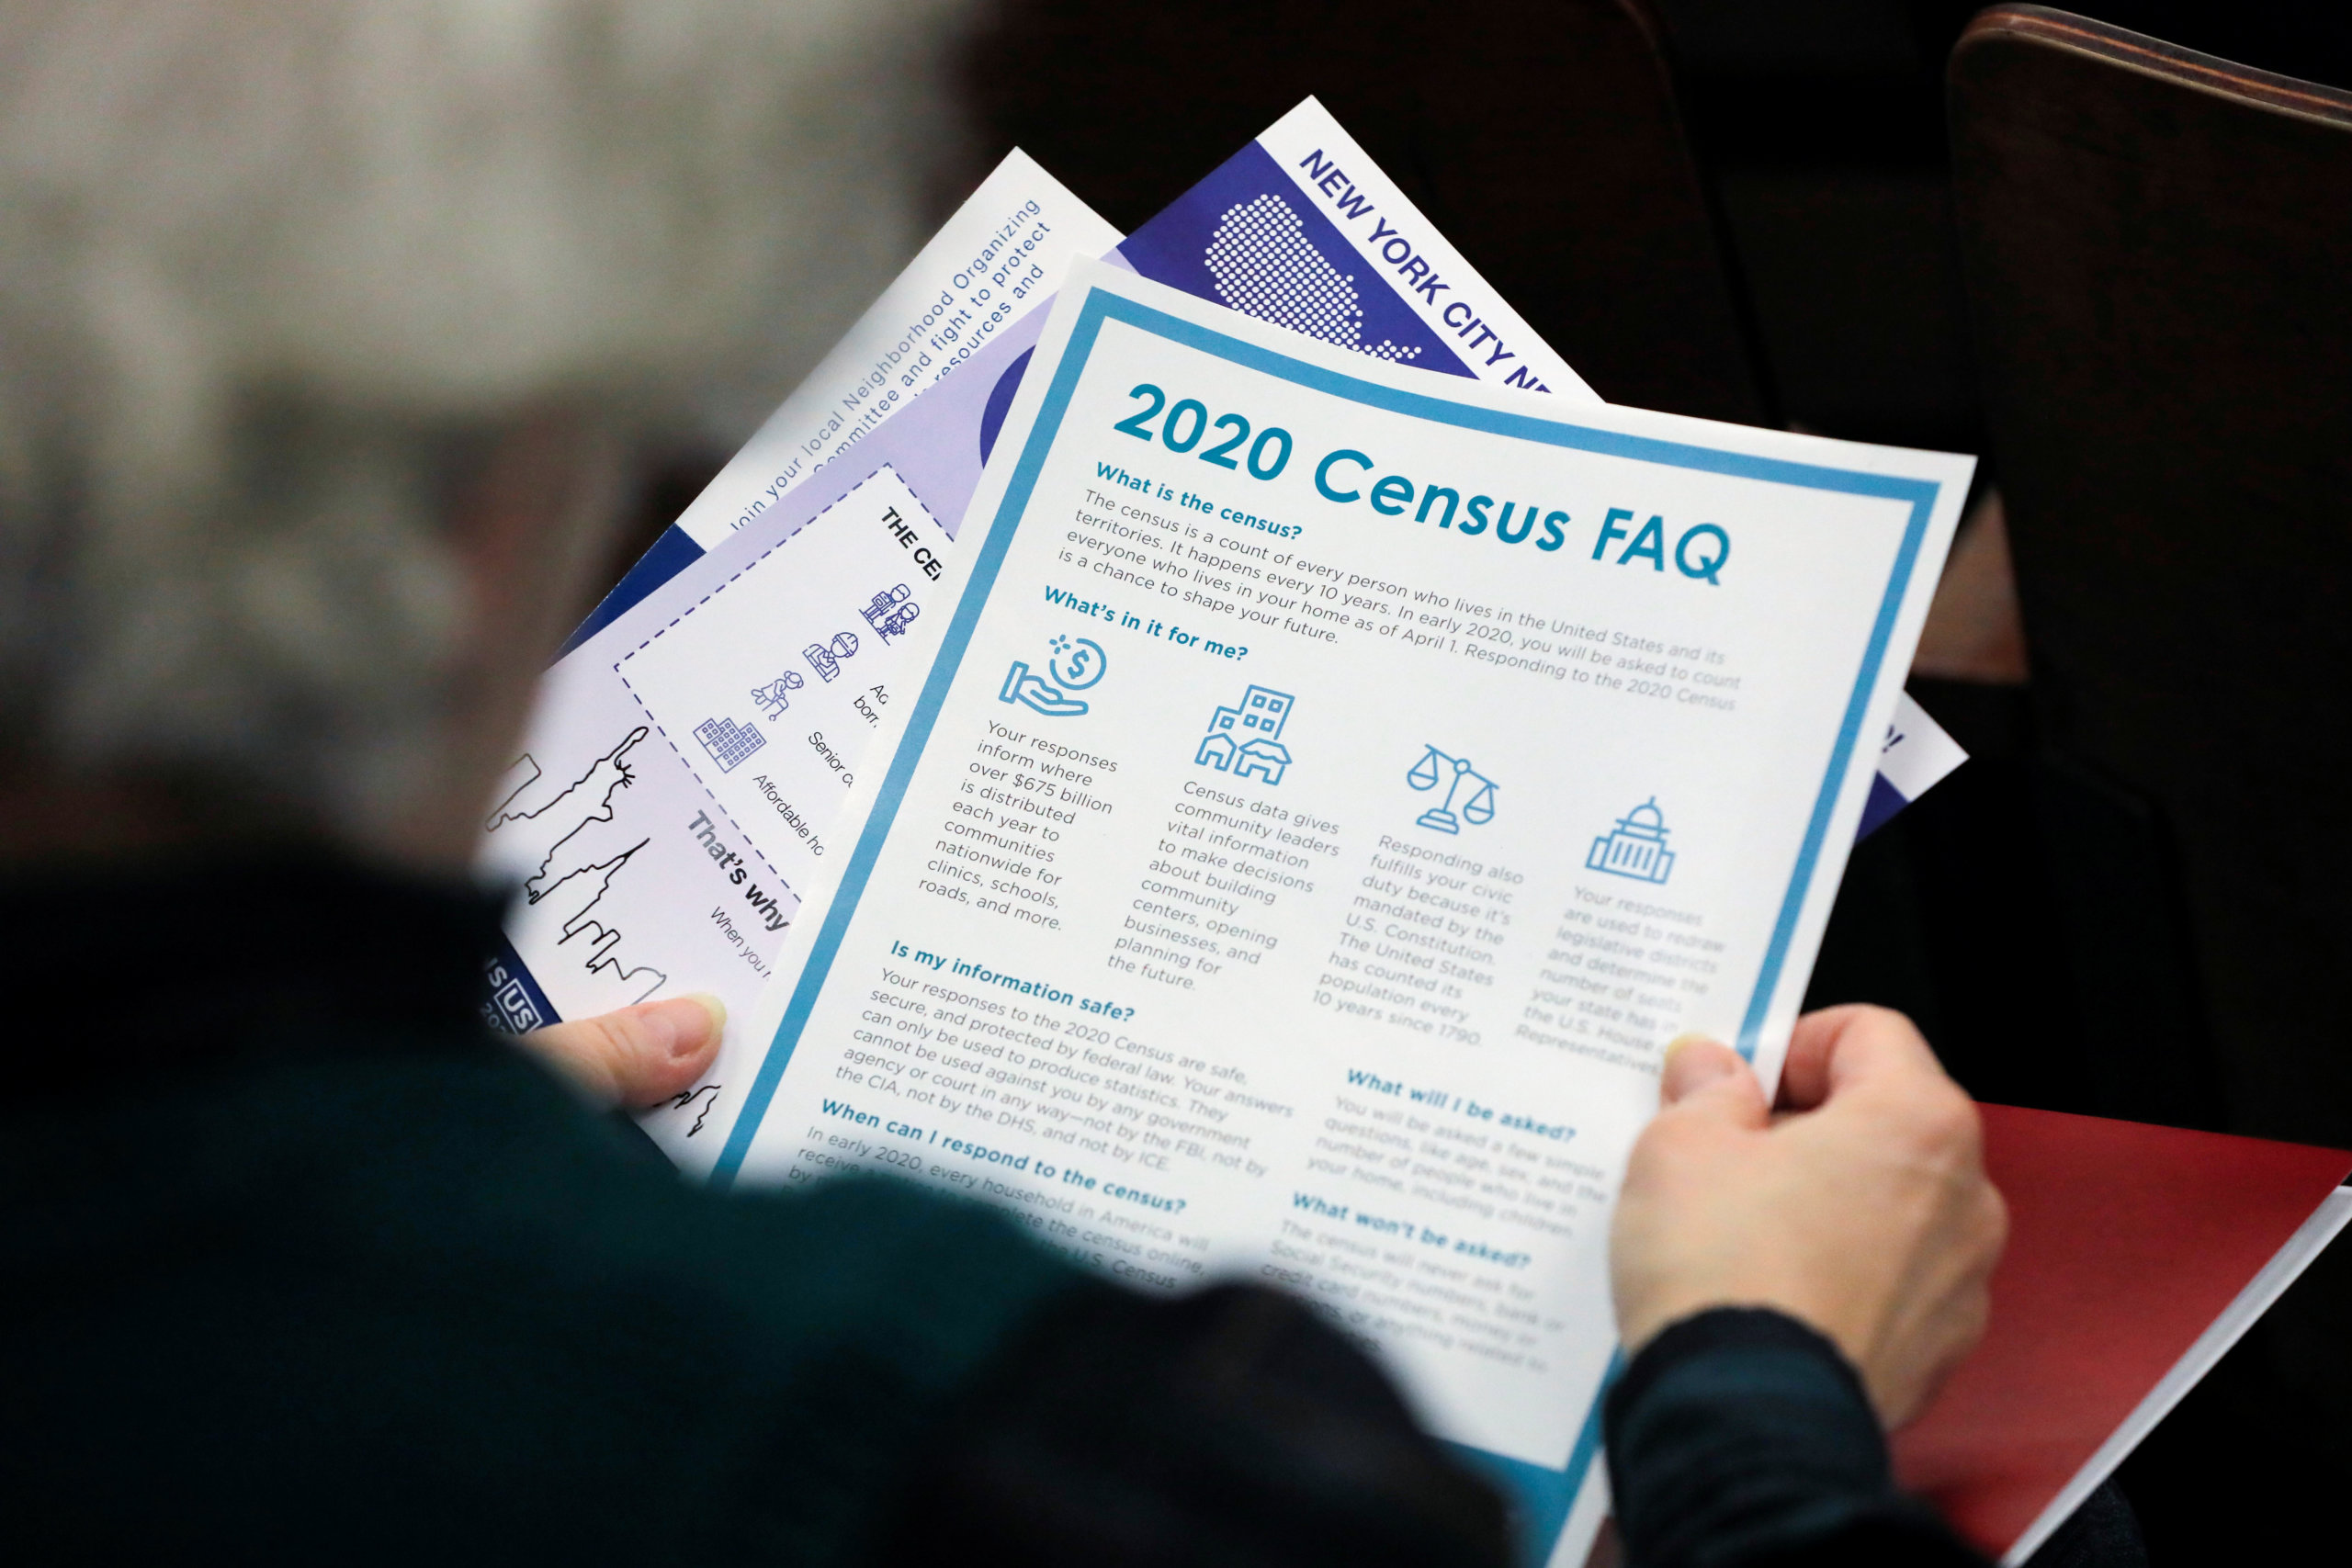 A person holds census information at an event where U.S. Rep. Alexandria Ocasio-Cortez (D-NY) spoke at a Census Town Hall at the Louis Armstrong Middle School in Queens, New York City, U.S., February 22, 2020.